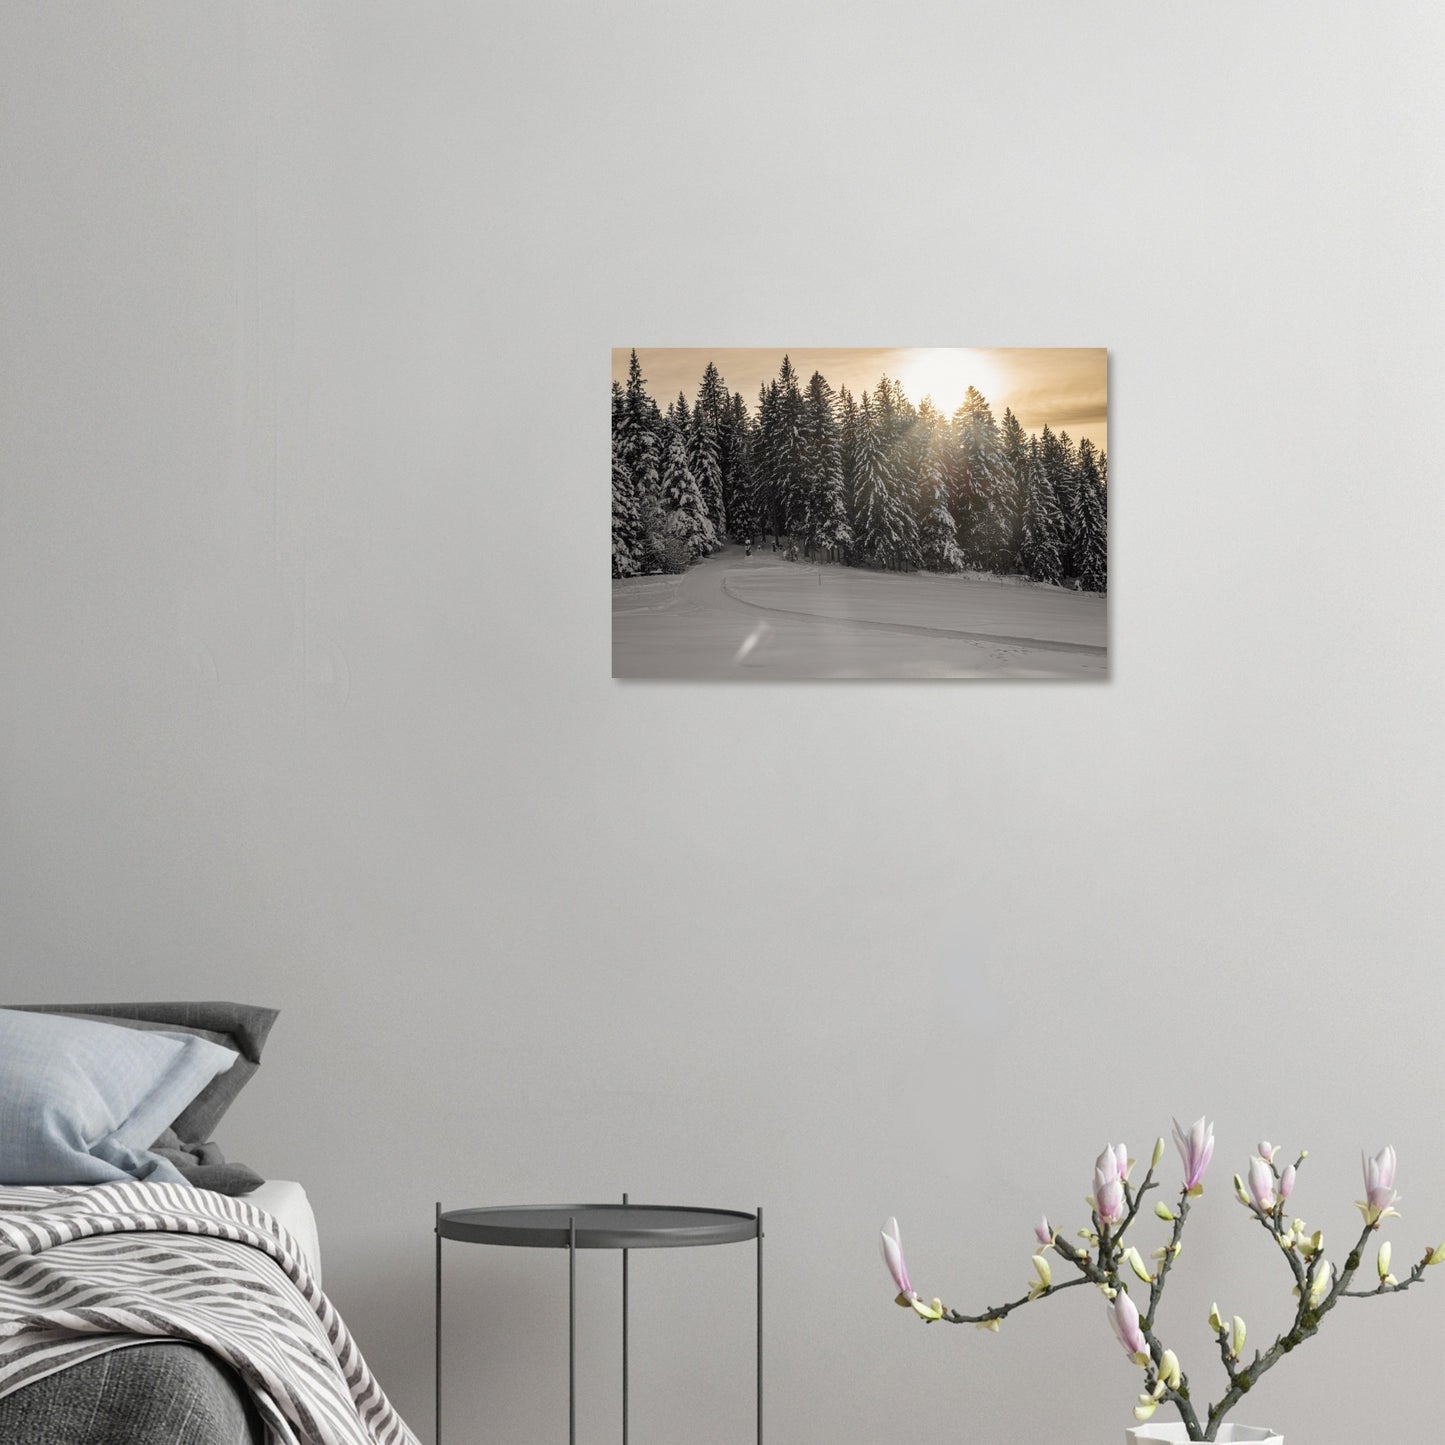 Sun rays over snowy forest - Premium Poster 